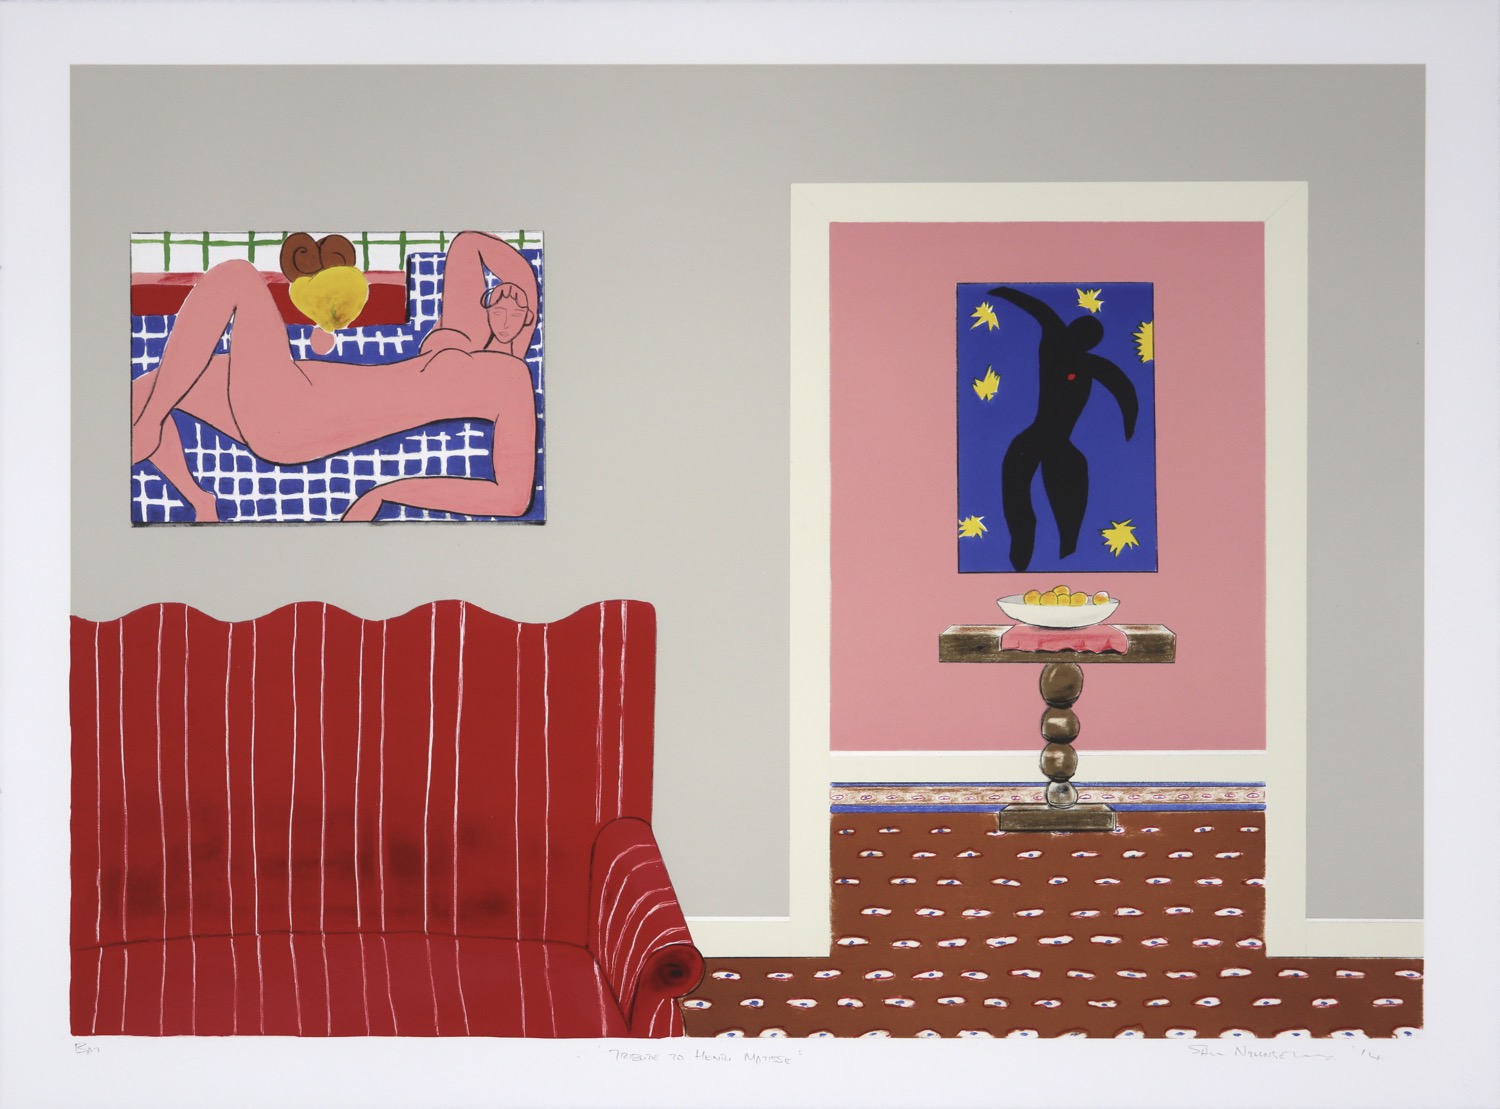 Matisse inspired interior of room with red couch and maroon carpet